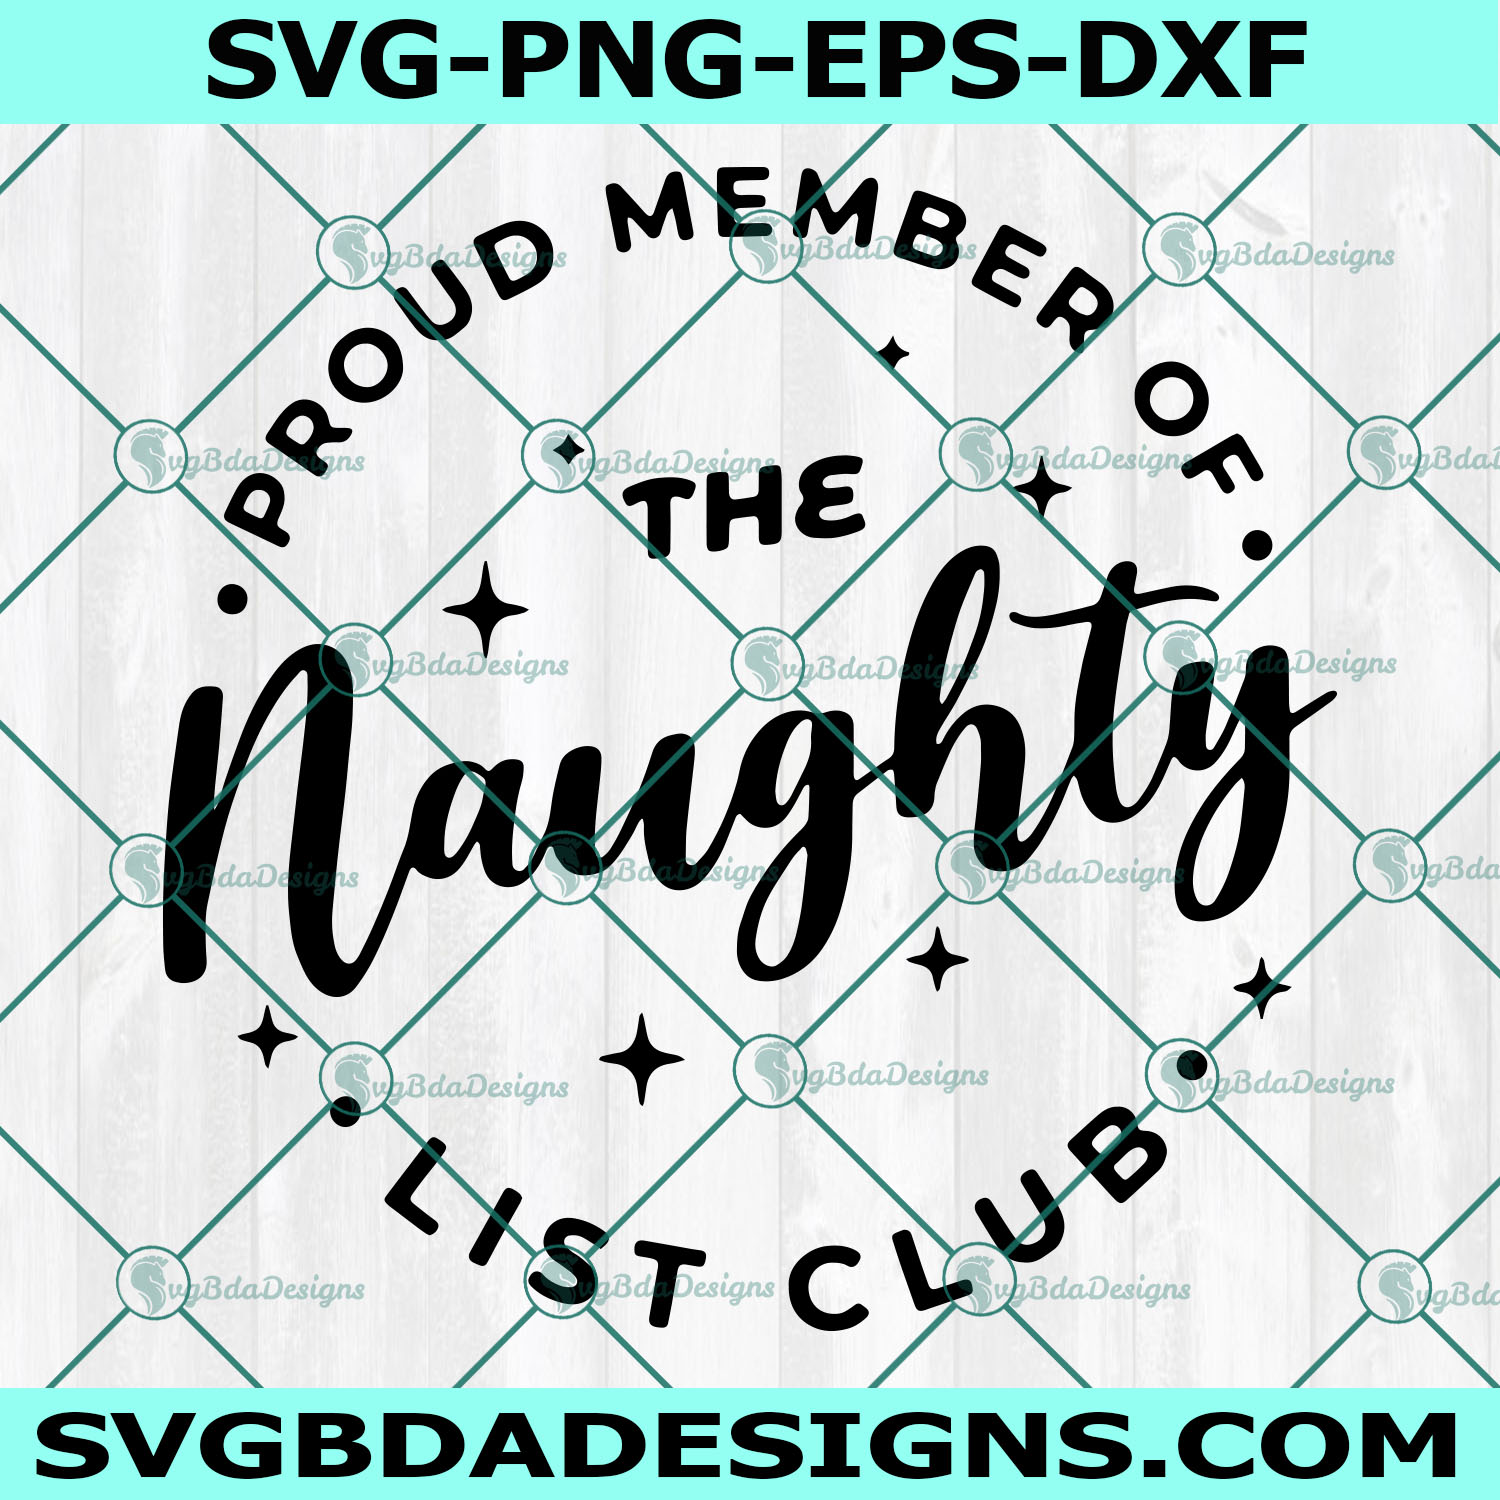 Proud member of the naughty list club svg, naughty list svg, nice list svg, merry christmas svg, Digital Download